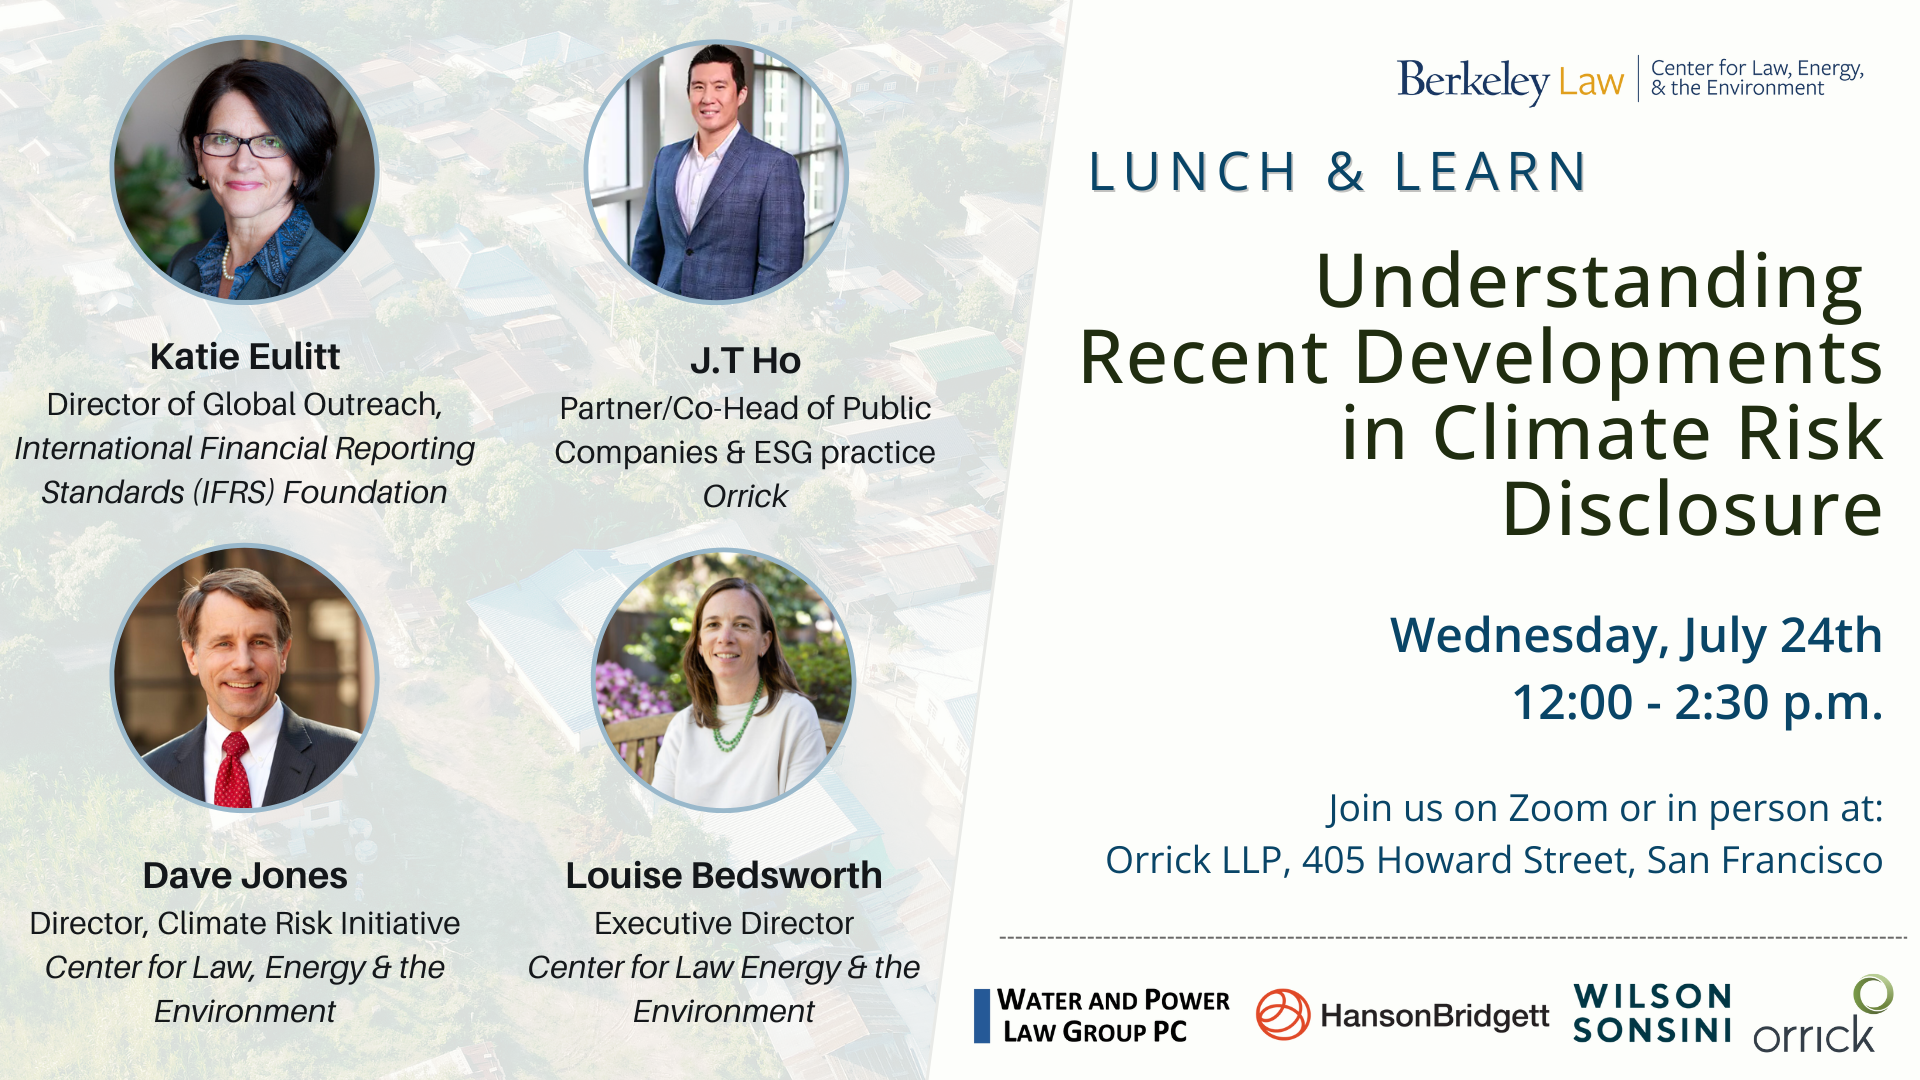 Lunch & Learn: Understanding Recent Developments in Climate Risk Disclosure on a green background with our three panelists listed on the left.